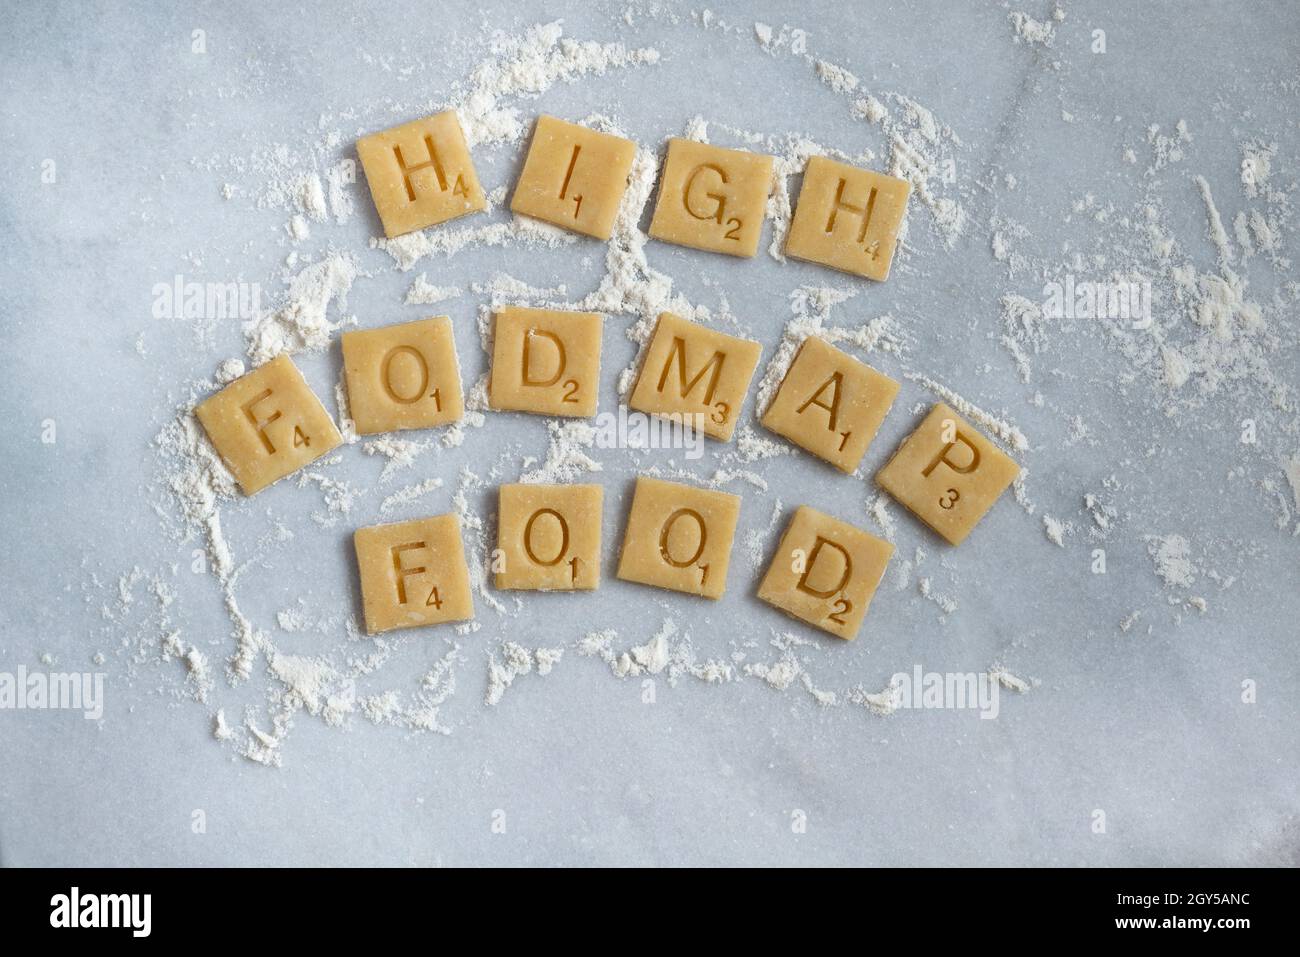 Wheat pastry squares spelling out 'High Fodmap Food'. Stock Photo